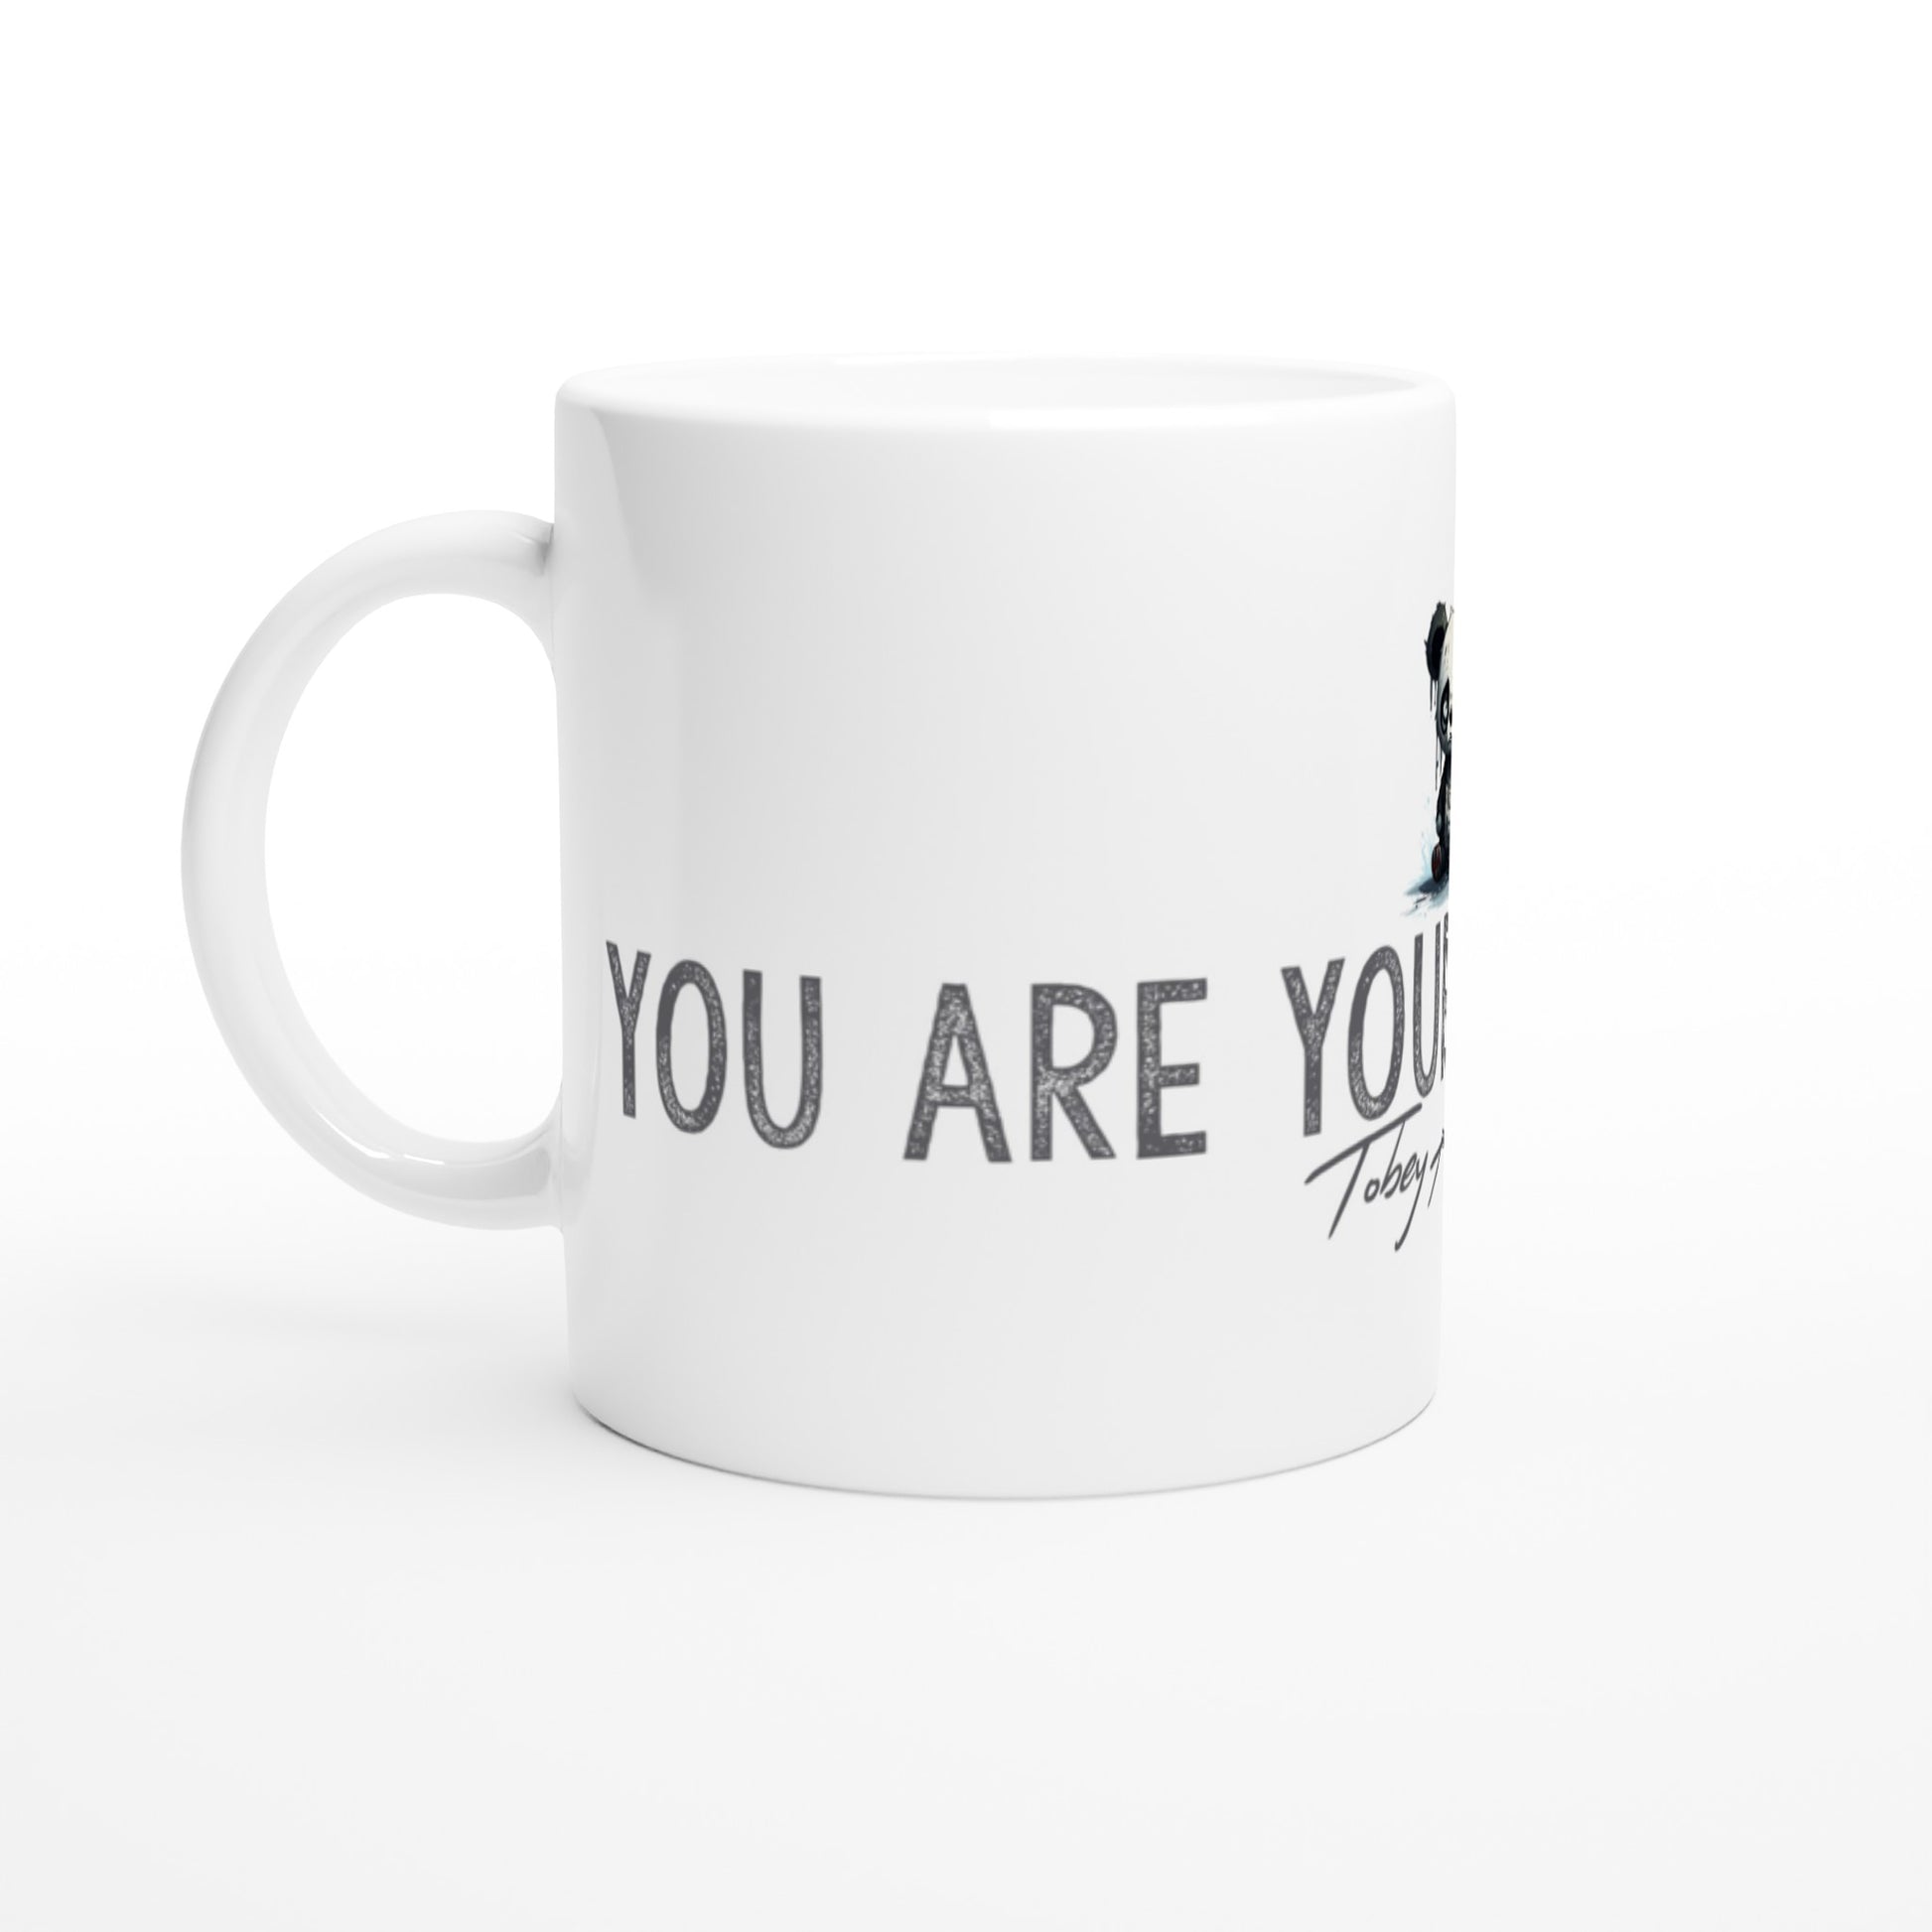 Embrace Limitless Potential with the YOU ARE YOUR ONLY LIMIT 11oz Ceramic Mug! Clothes by Tobey Alexander